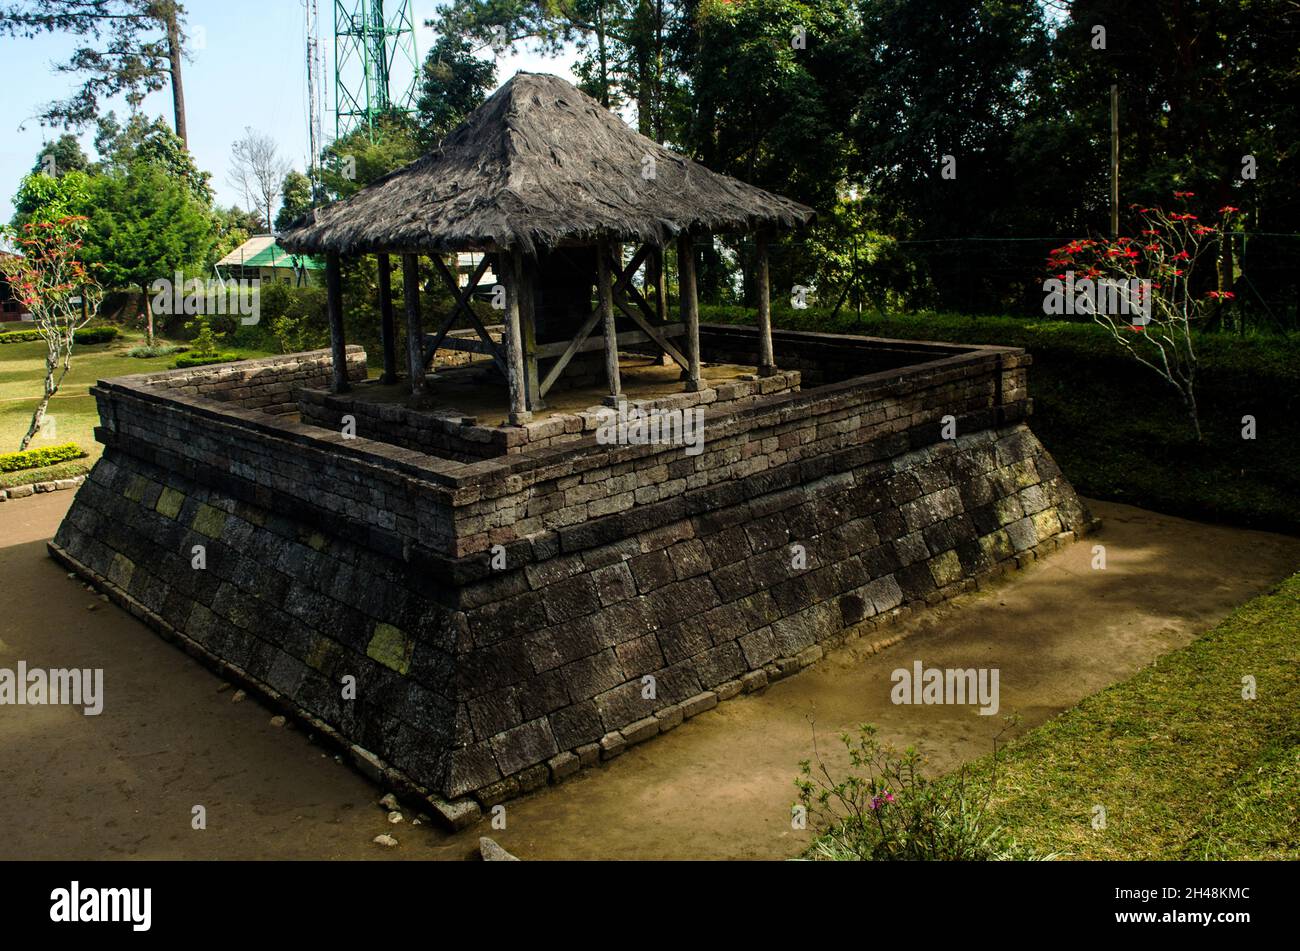 Karanganyar, Indonesia - July 31, 2015: One of the temples in the tourist area of Cetho Temple, Central Java Province, Indonesia on July 31, 2015. Stock Photo